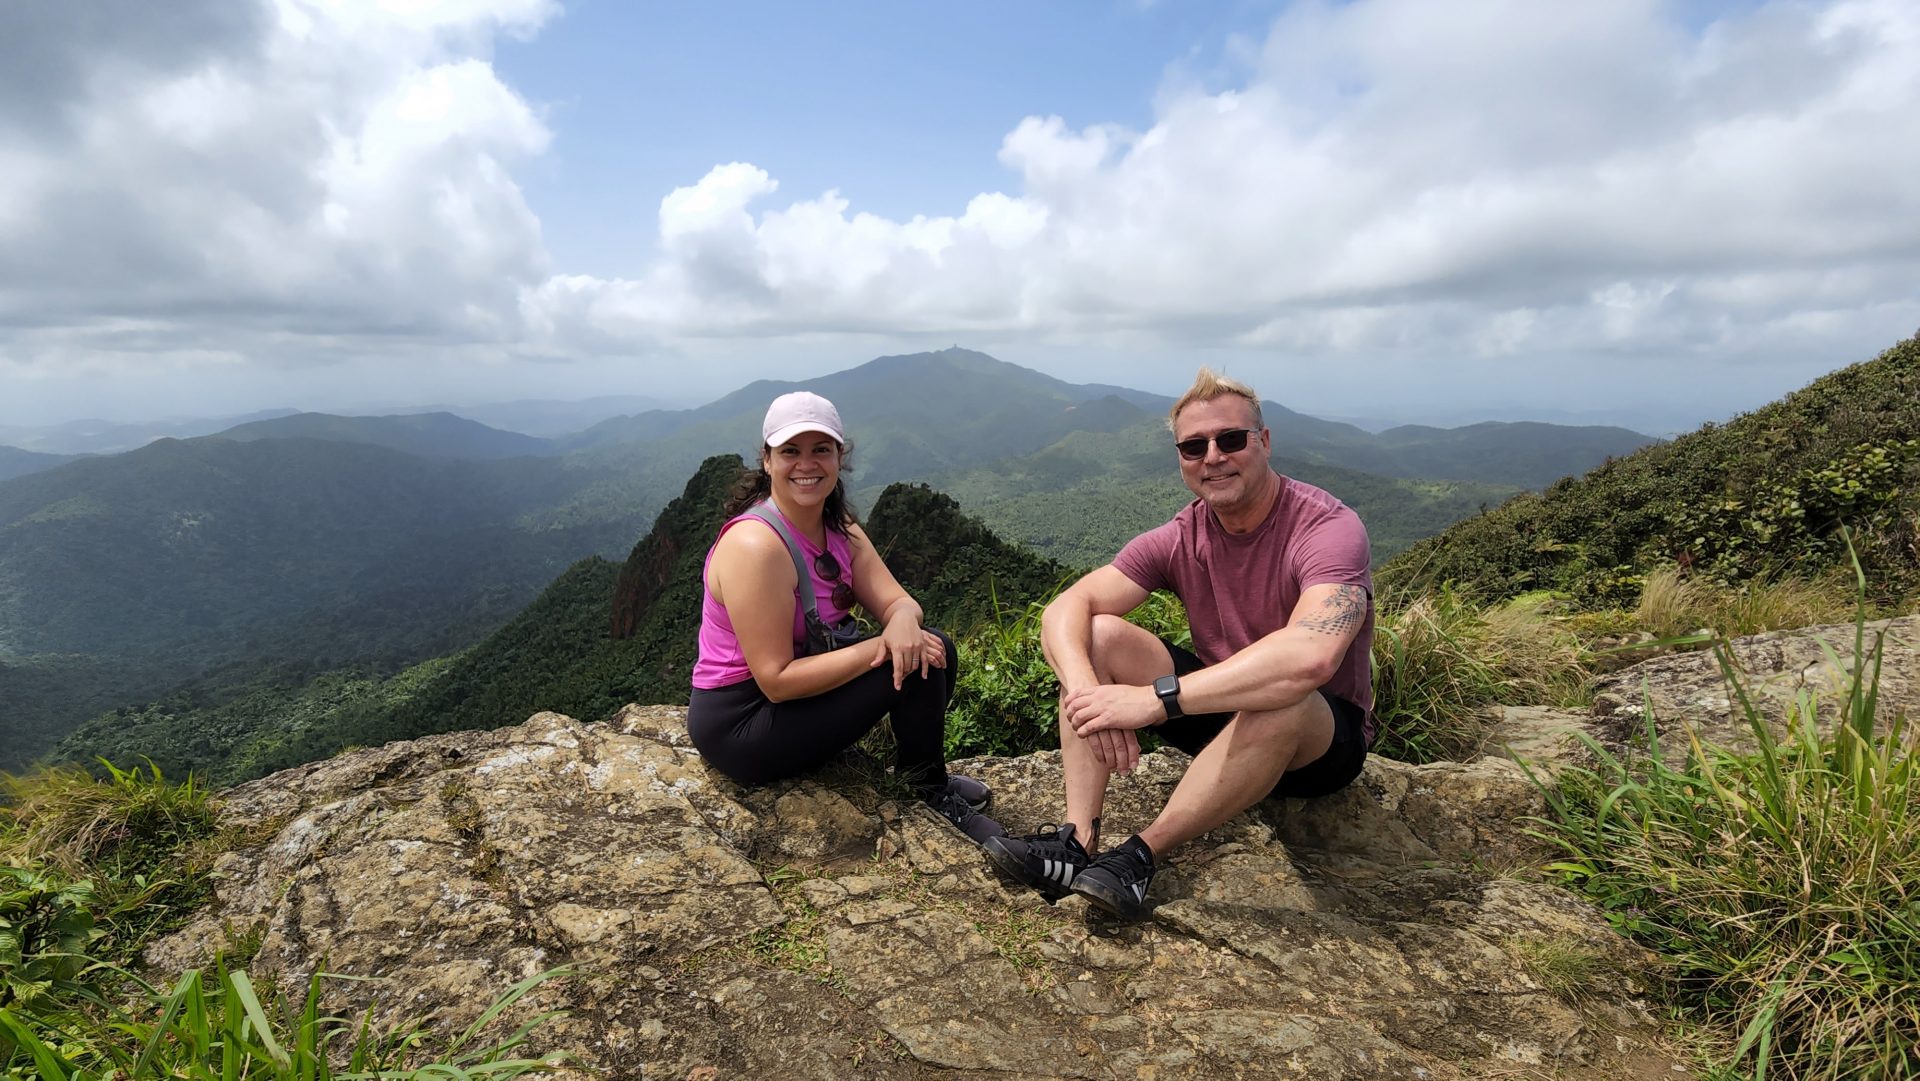 Taina & Jeff sitting on a rock at the top of El Yunque with mountains in the background